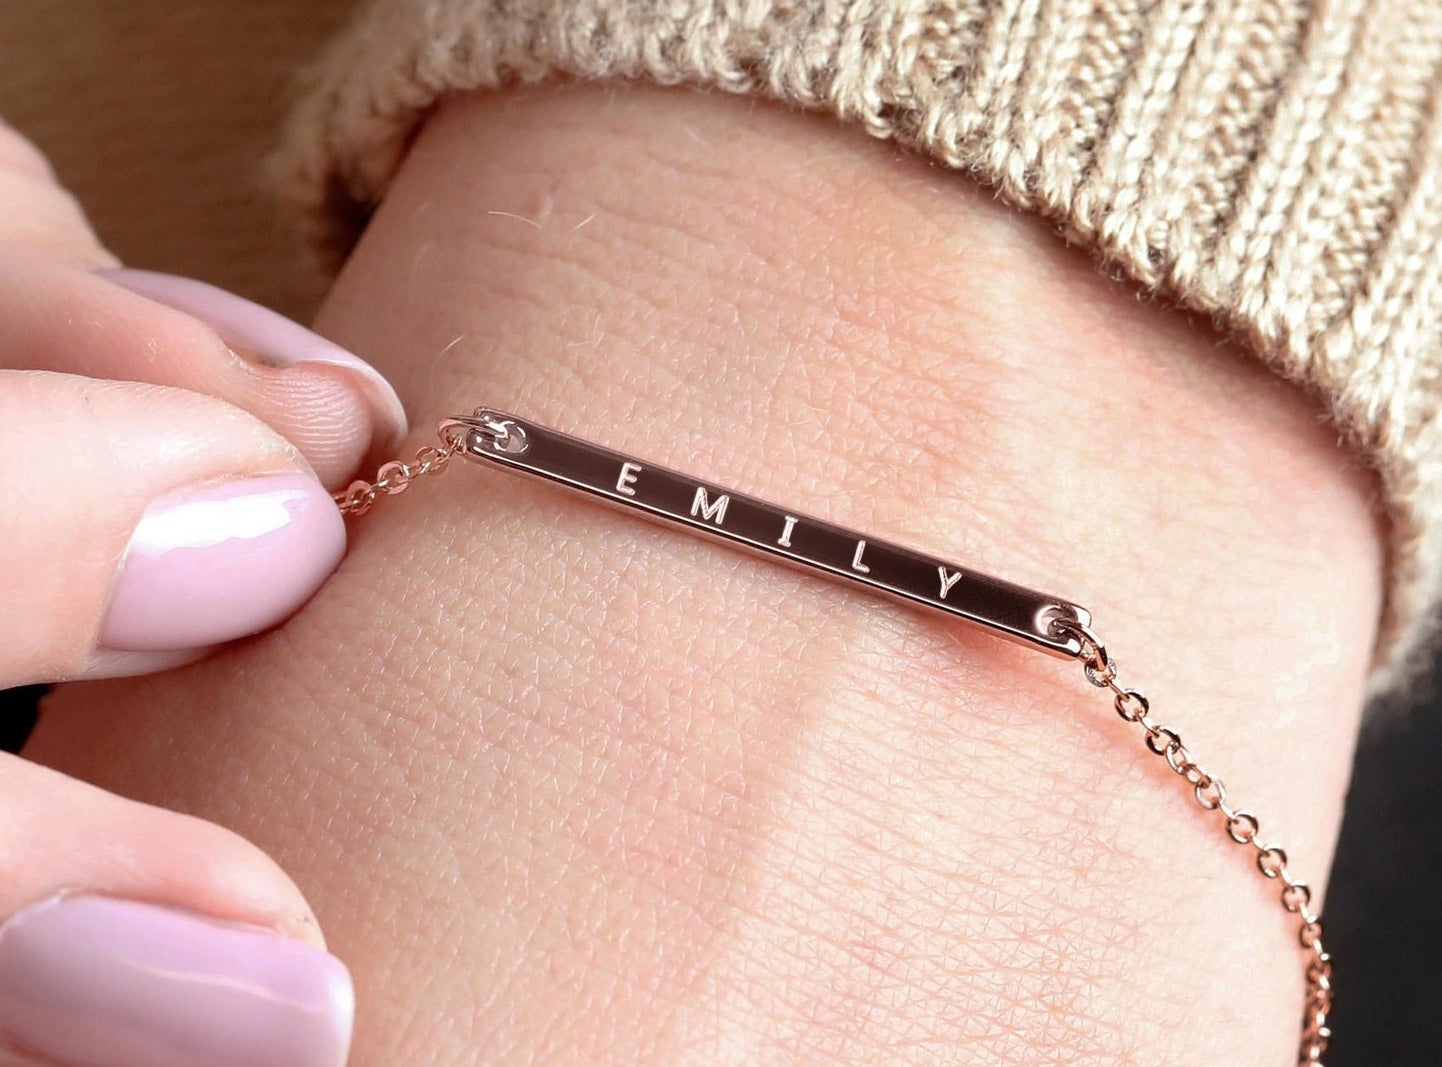 A simple golden bracelet with a bar engraved with the name &quot;Emily.&quot;